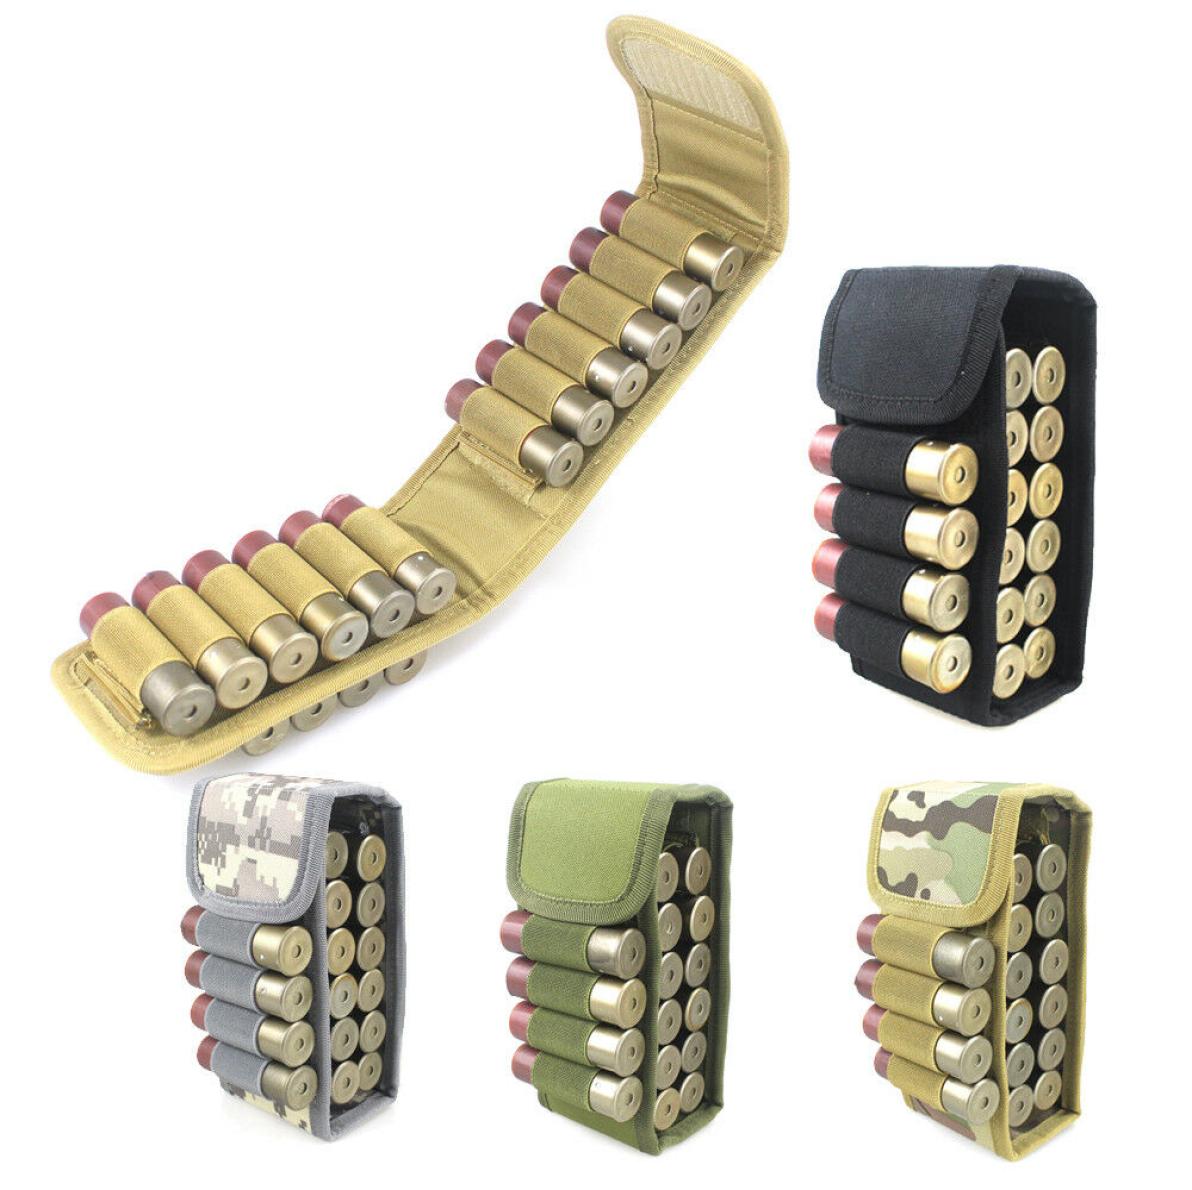 

Tactical 12 Gauge Sgun Shells 16 Round Bullet Package Molle Magazine Pouch2962314, Green